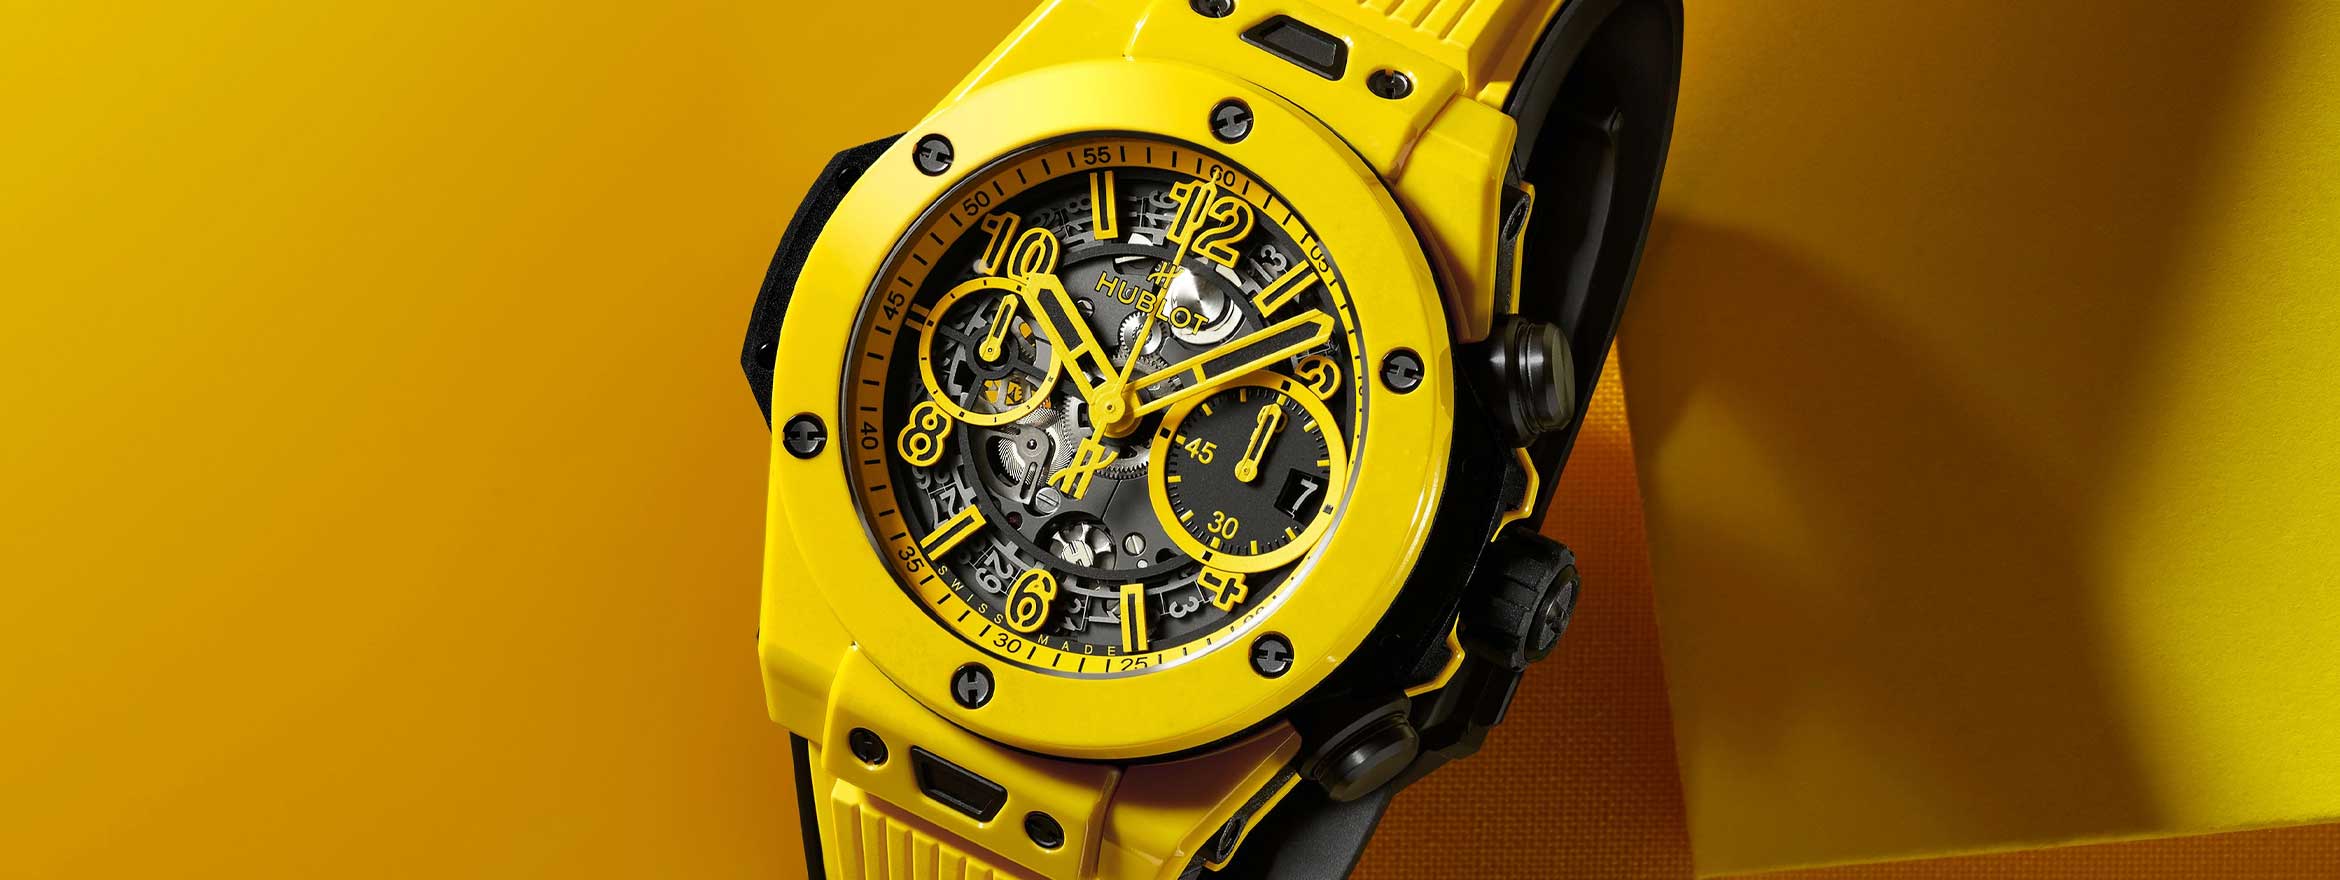 Hublot Invites you to enjoy the Sunny Side of Life